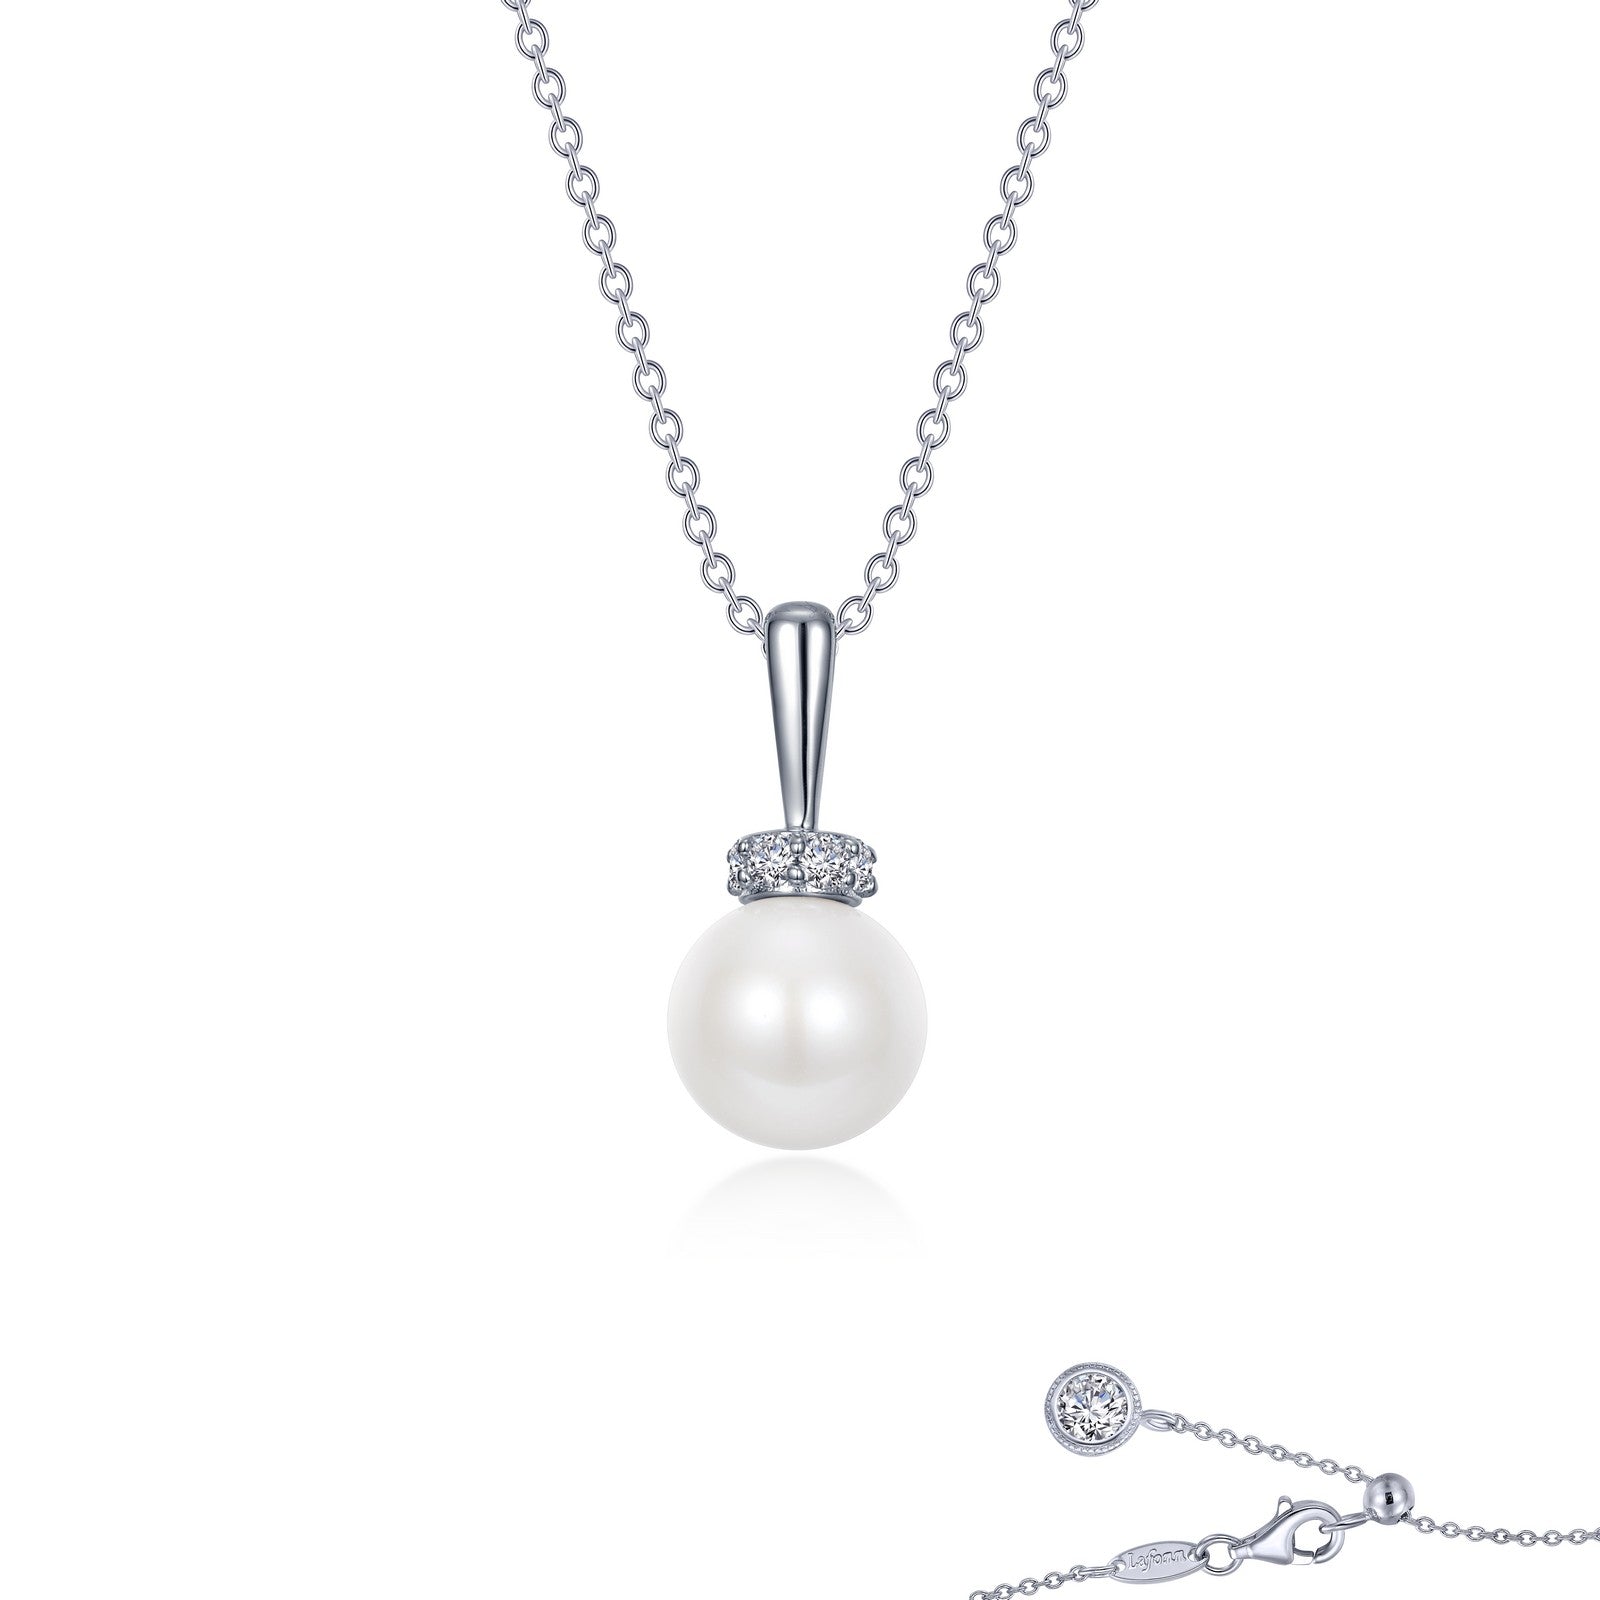 Lafonn Simulated Diamond & Cultured Freshwater Pearl Necklace N0235PLP20